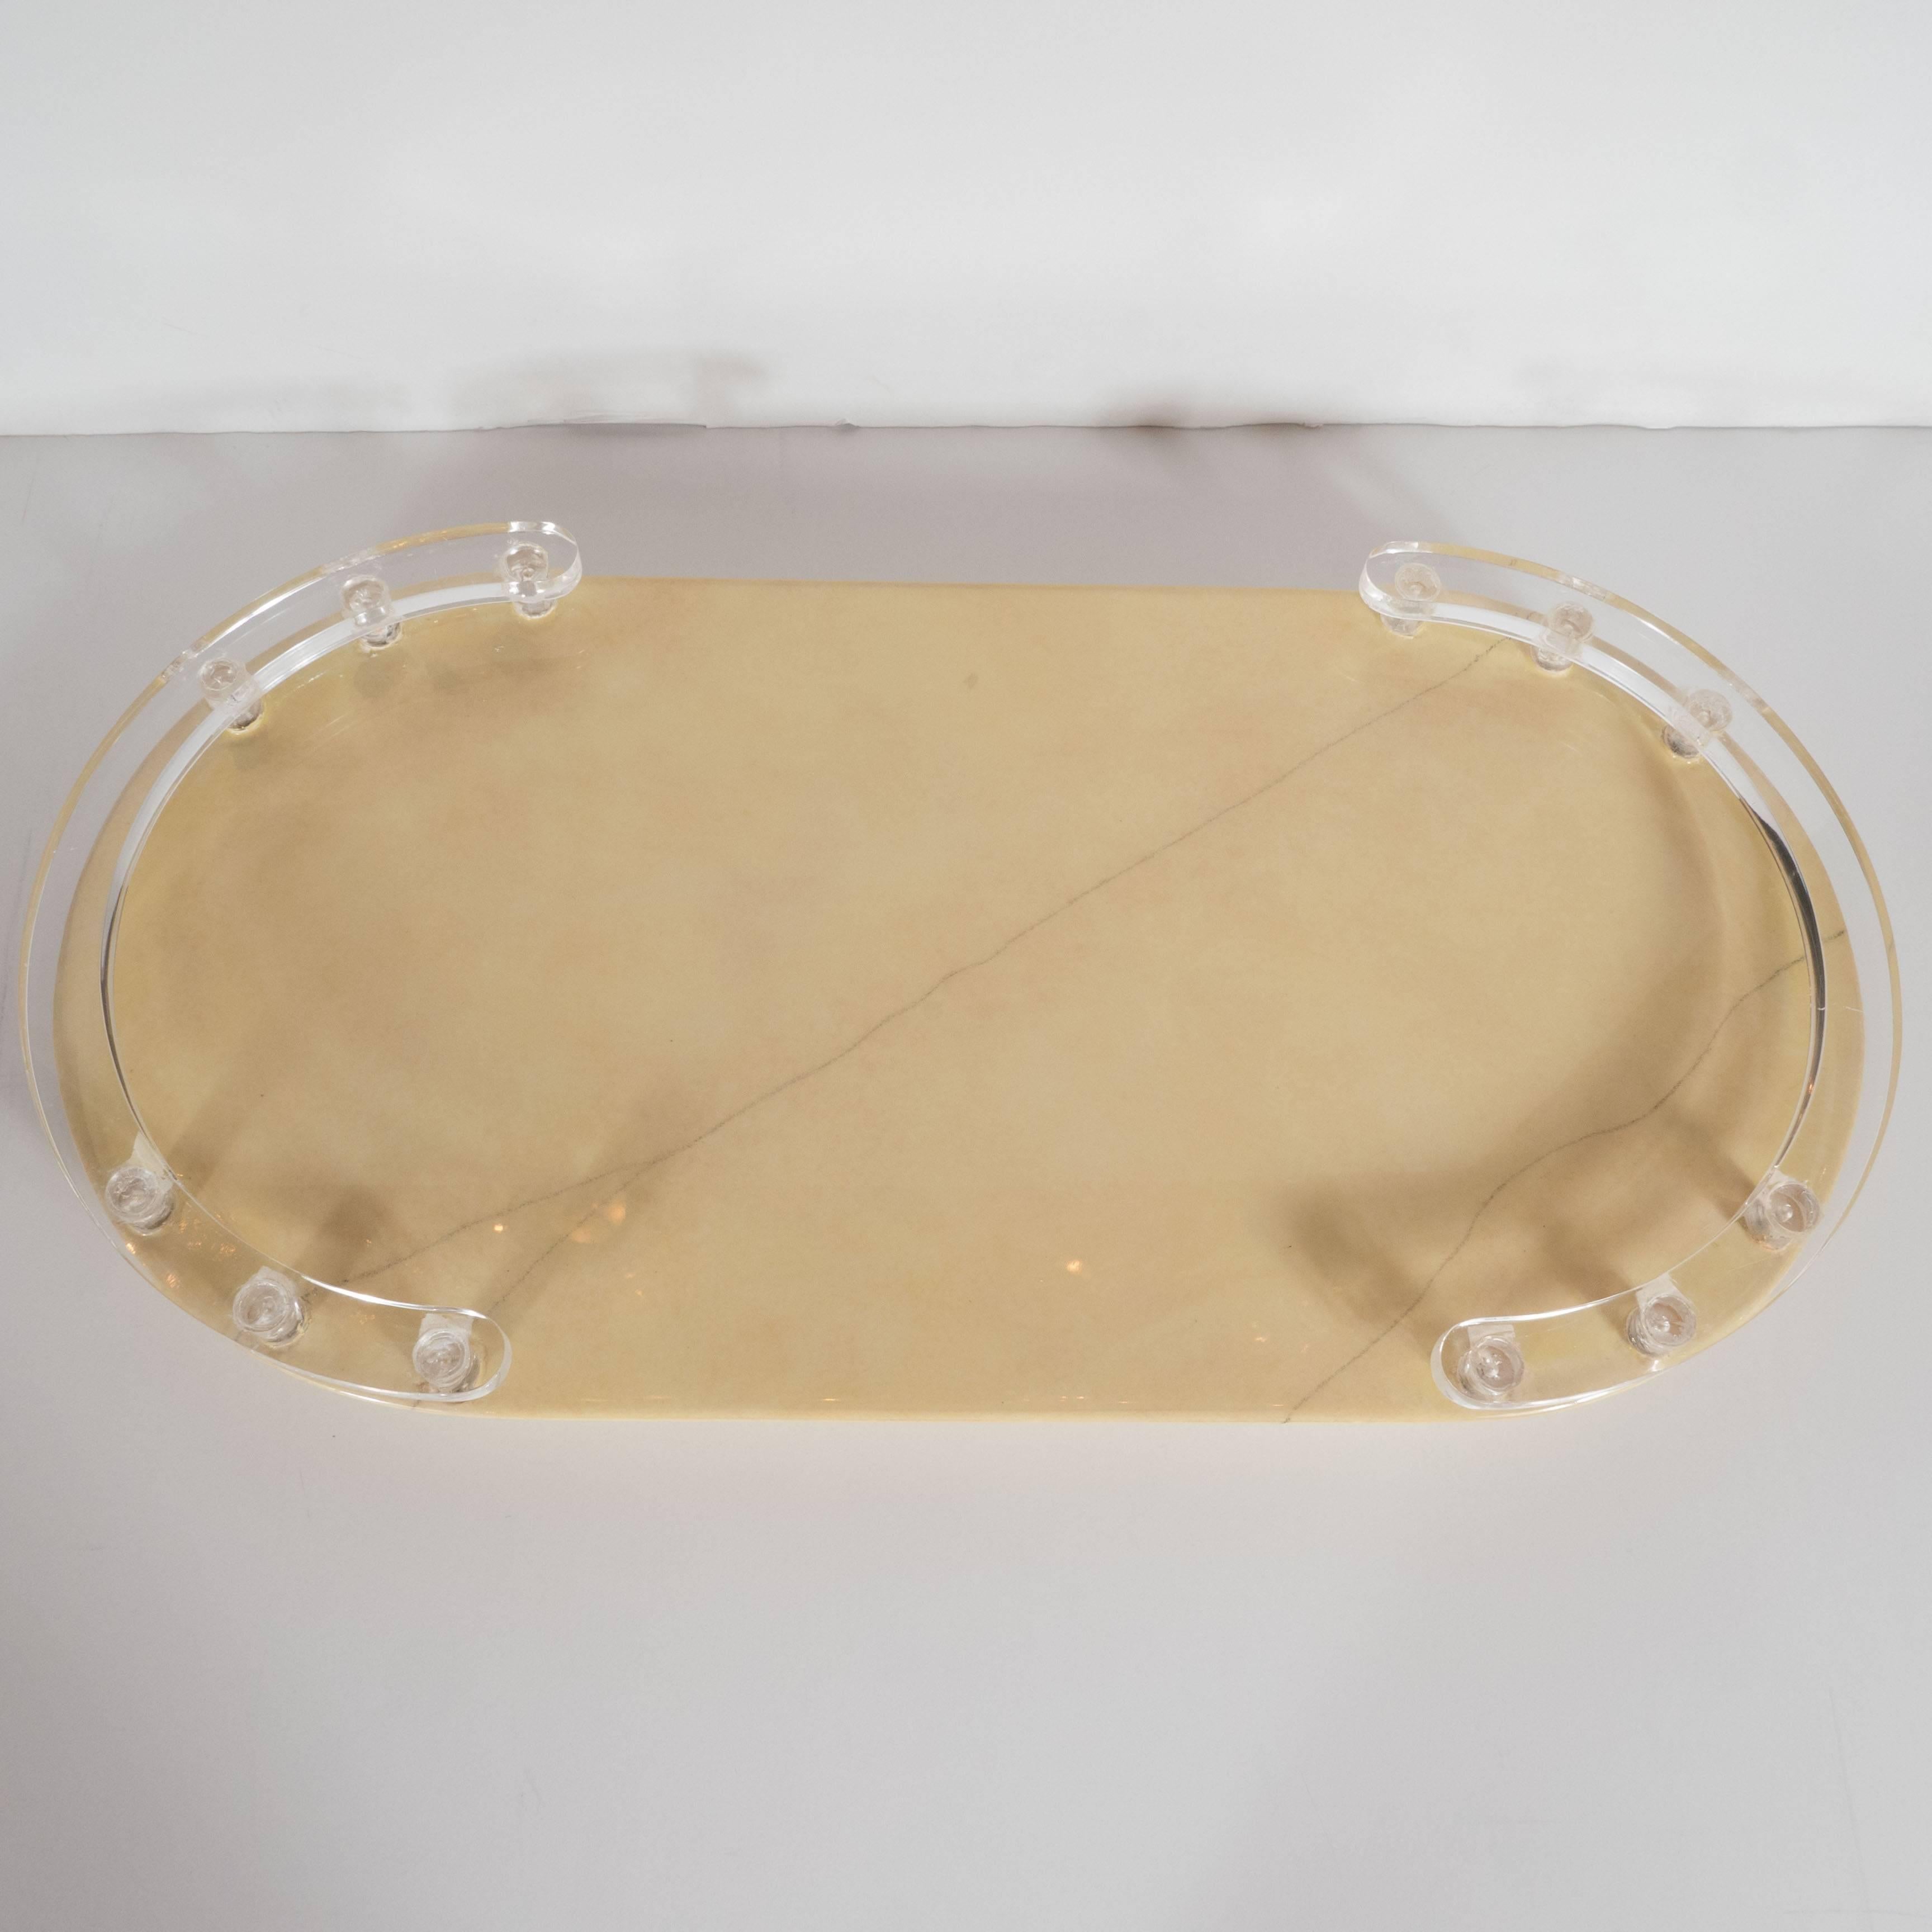 American Mid-Century Modernist Lacquered Goatskin and Lucite Tray